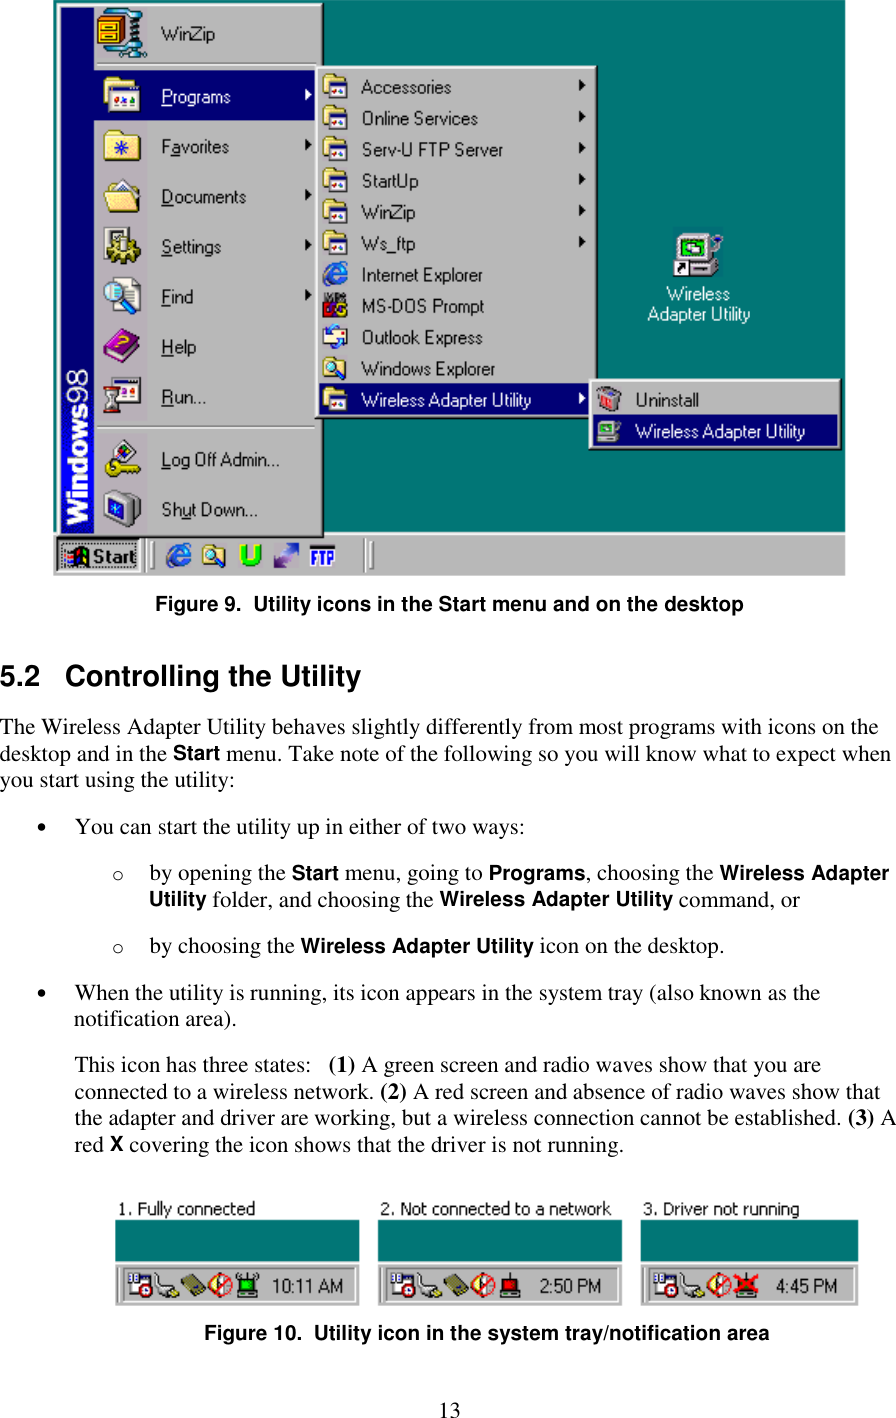   13  Figure 9.  Utility icons in the Start menu and on the desktop 5.2   Controlling the Utility The Wireless Adapter Utility behaves slightly differently from most programs with icons on the desktop and in the Start menu. Take note of the following so you will know what to expect when you start using the utility: •  You can start the utility up in either of two ways: o  by opening the Start menu, going to Programs, choosing the Wireless Adapter Utility folder, and choosing the Wireless Adapter Utility command, or o  by choosing the Wireless Adapter Utility icon on the desktop. •  When the utility is running, its icon appears in the system tray (also known as the notification area). This icon has three states:   (1) A green screen and radio waves show that you are connected to a wireless network. (2) A red screen and absence of radio waves show that the adapter and driver are working, but a wireless connection cannot be established. (3) A red X covering the icon shows that the driver is not running.  Figure 10.  Utility icon in the system tray/notification area 